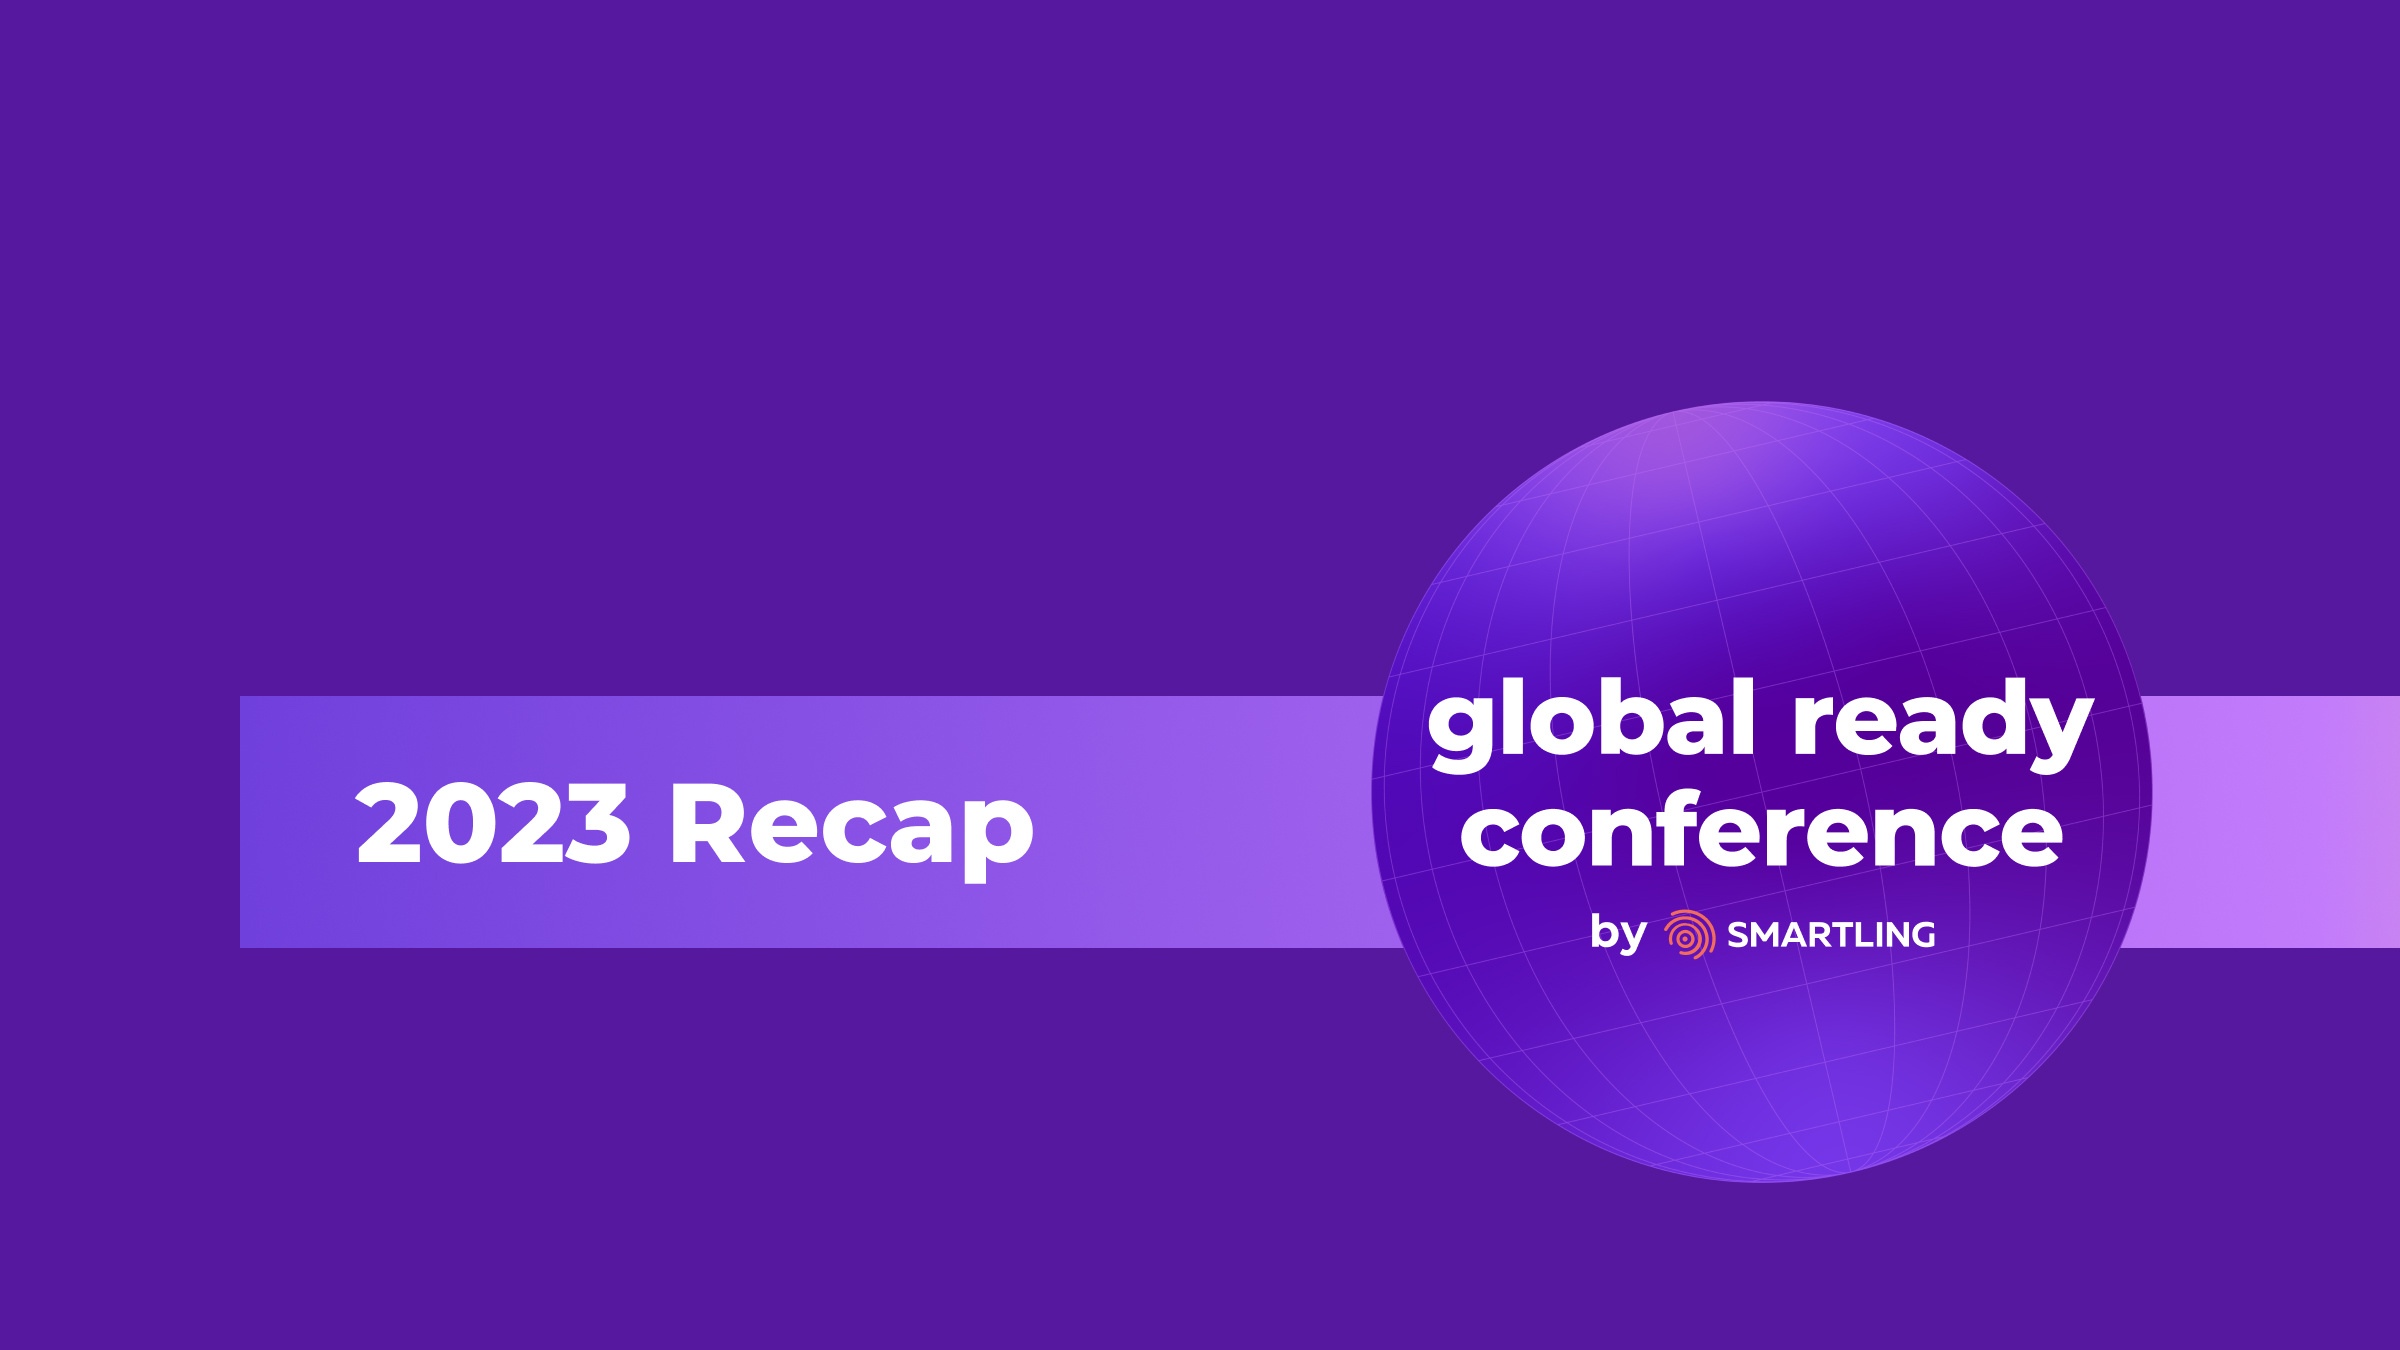 Top 5 Insights About LanguageAI and Its Impact on Localization - 2023 Global Ready Conference 